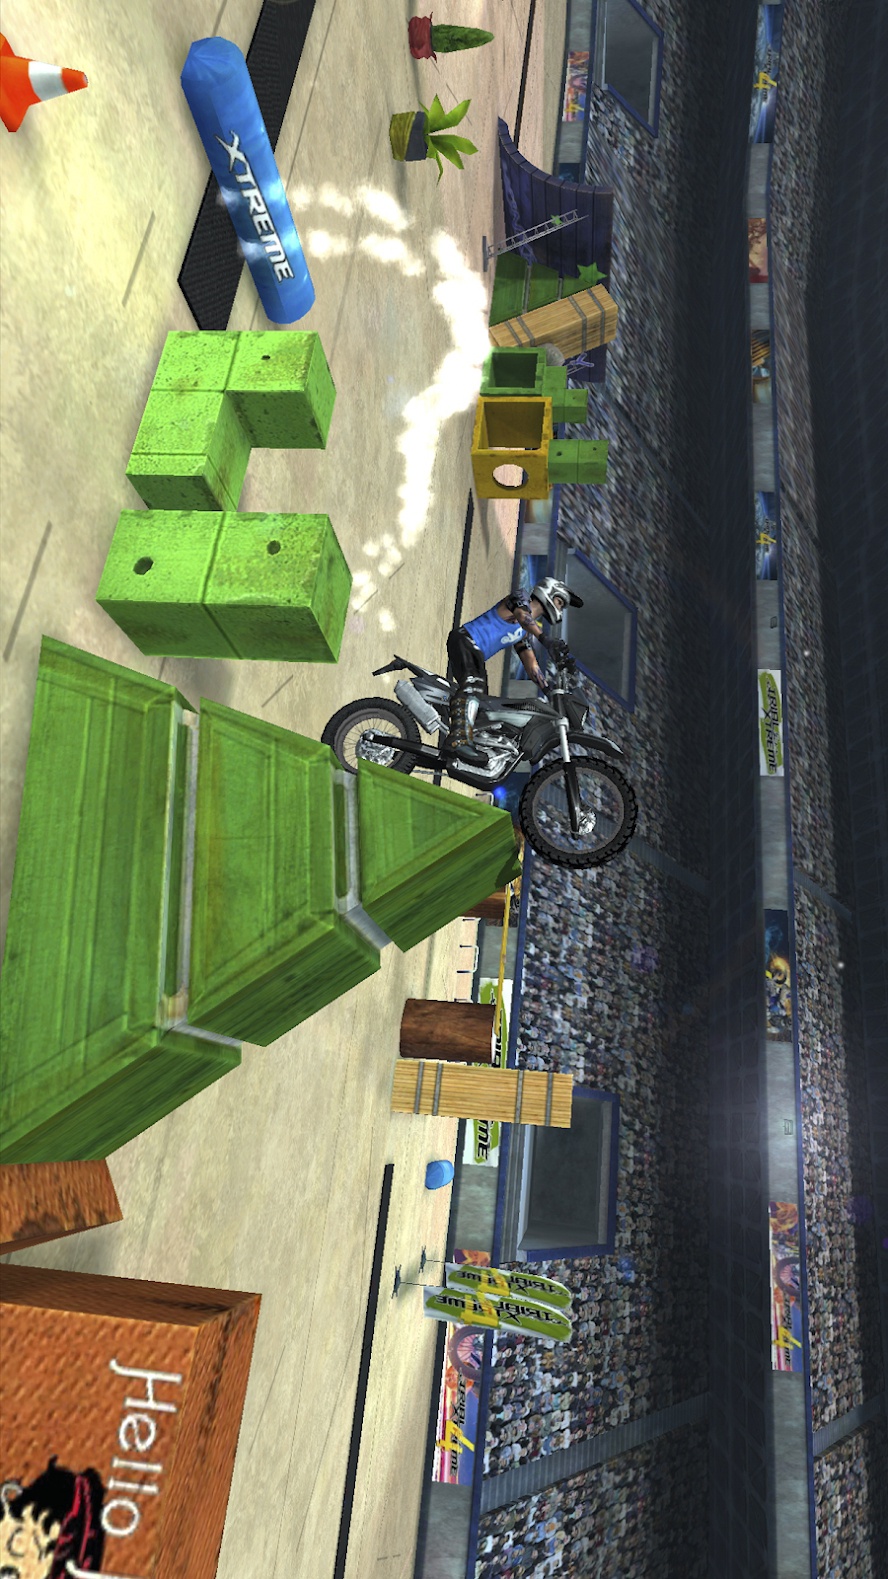 Trial Xtreme 4 Remastered